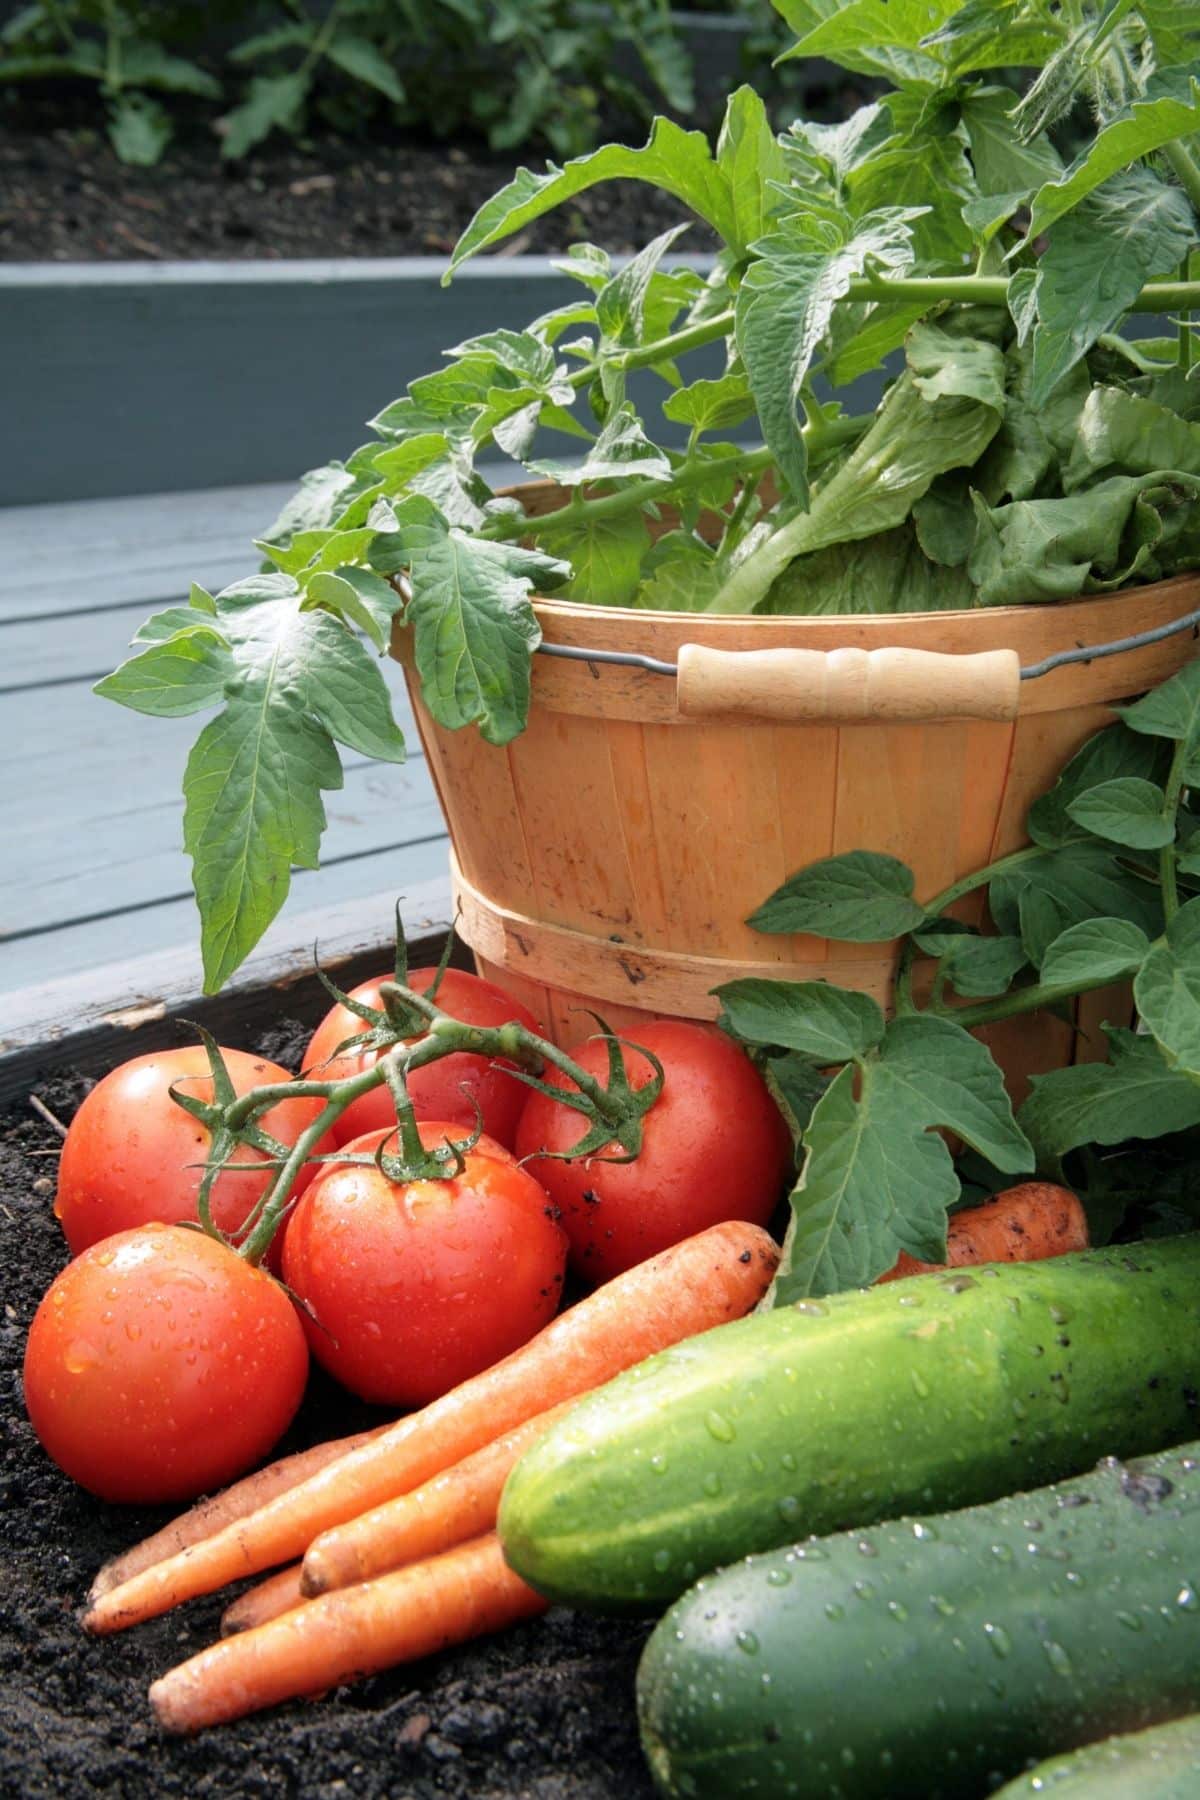 Tomatoes, carrots and cucumber in a garden.